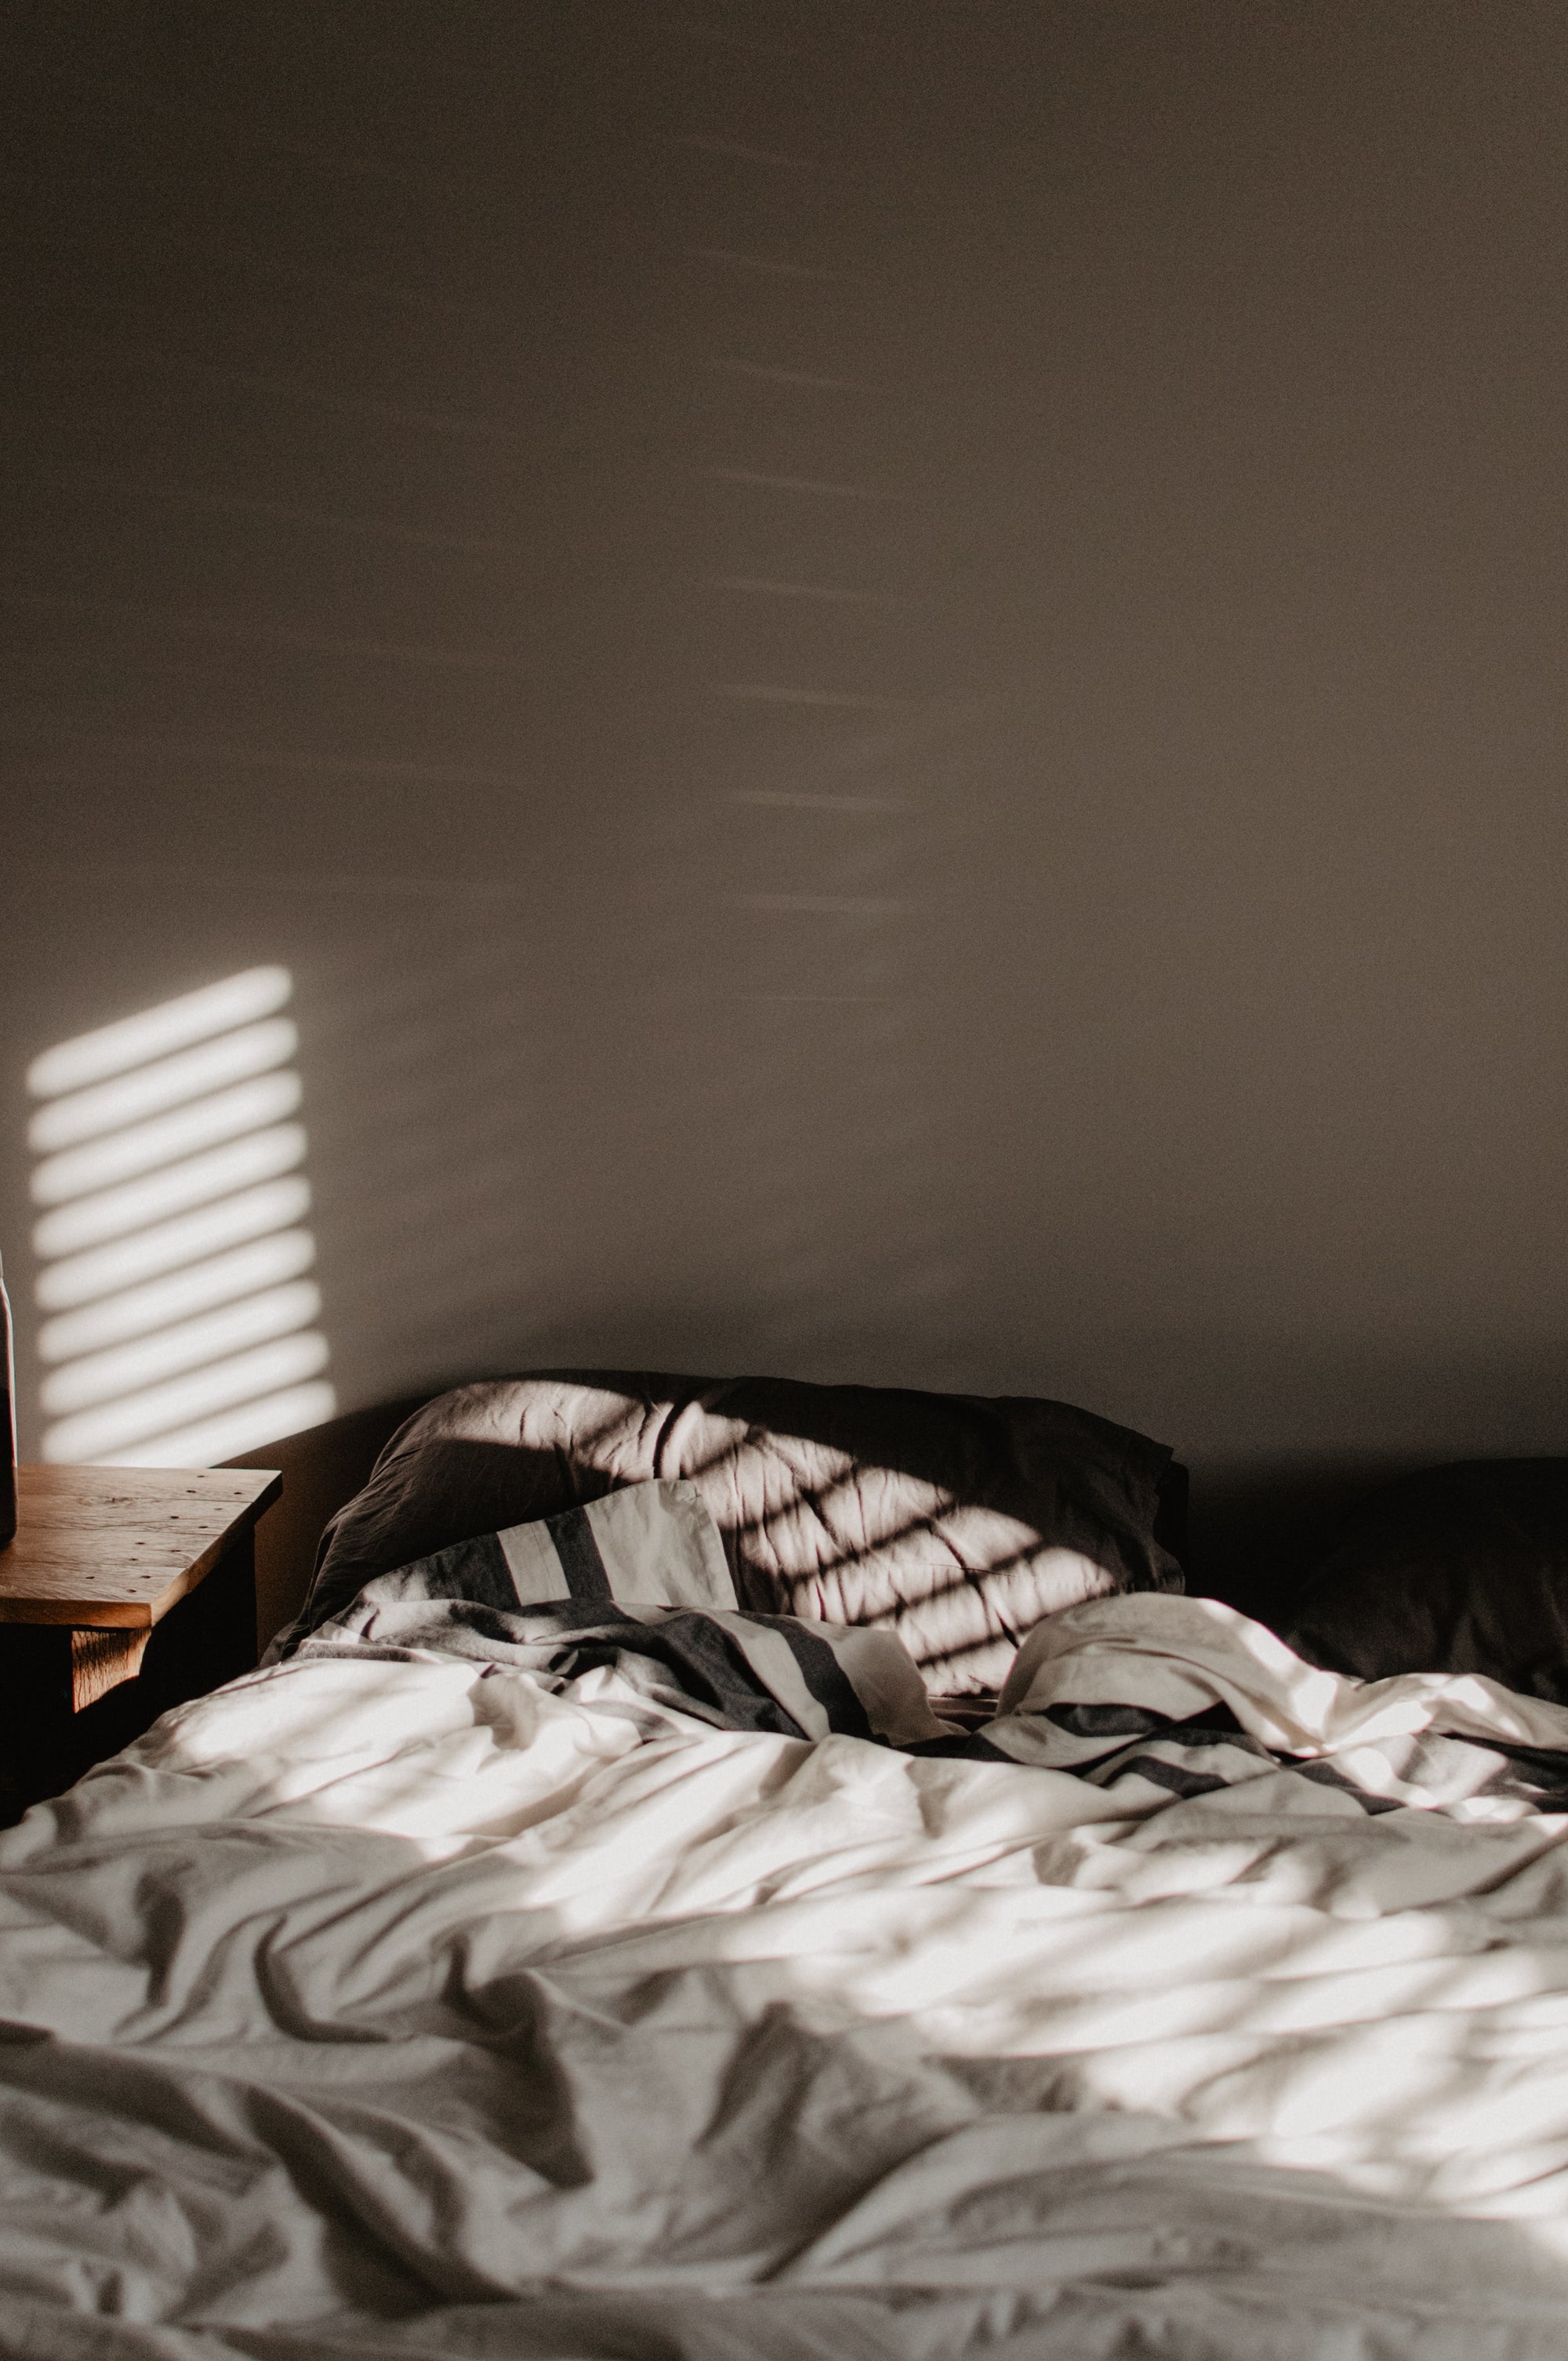 The link between inadequate sleep and depression